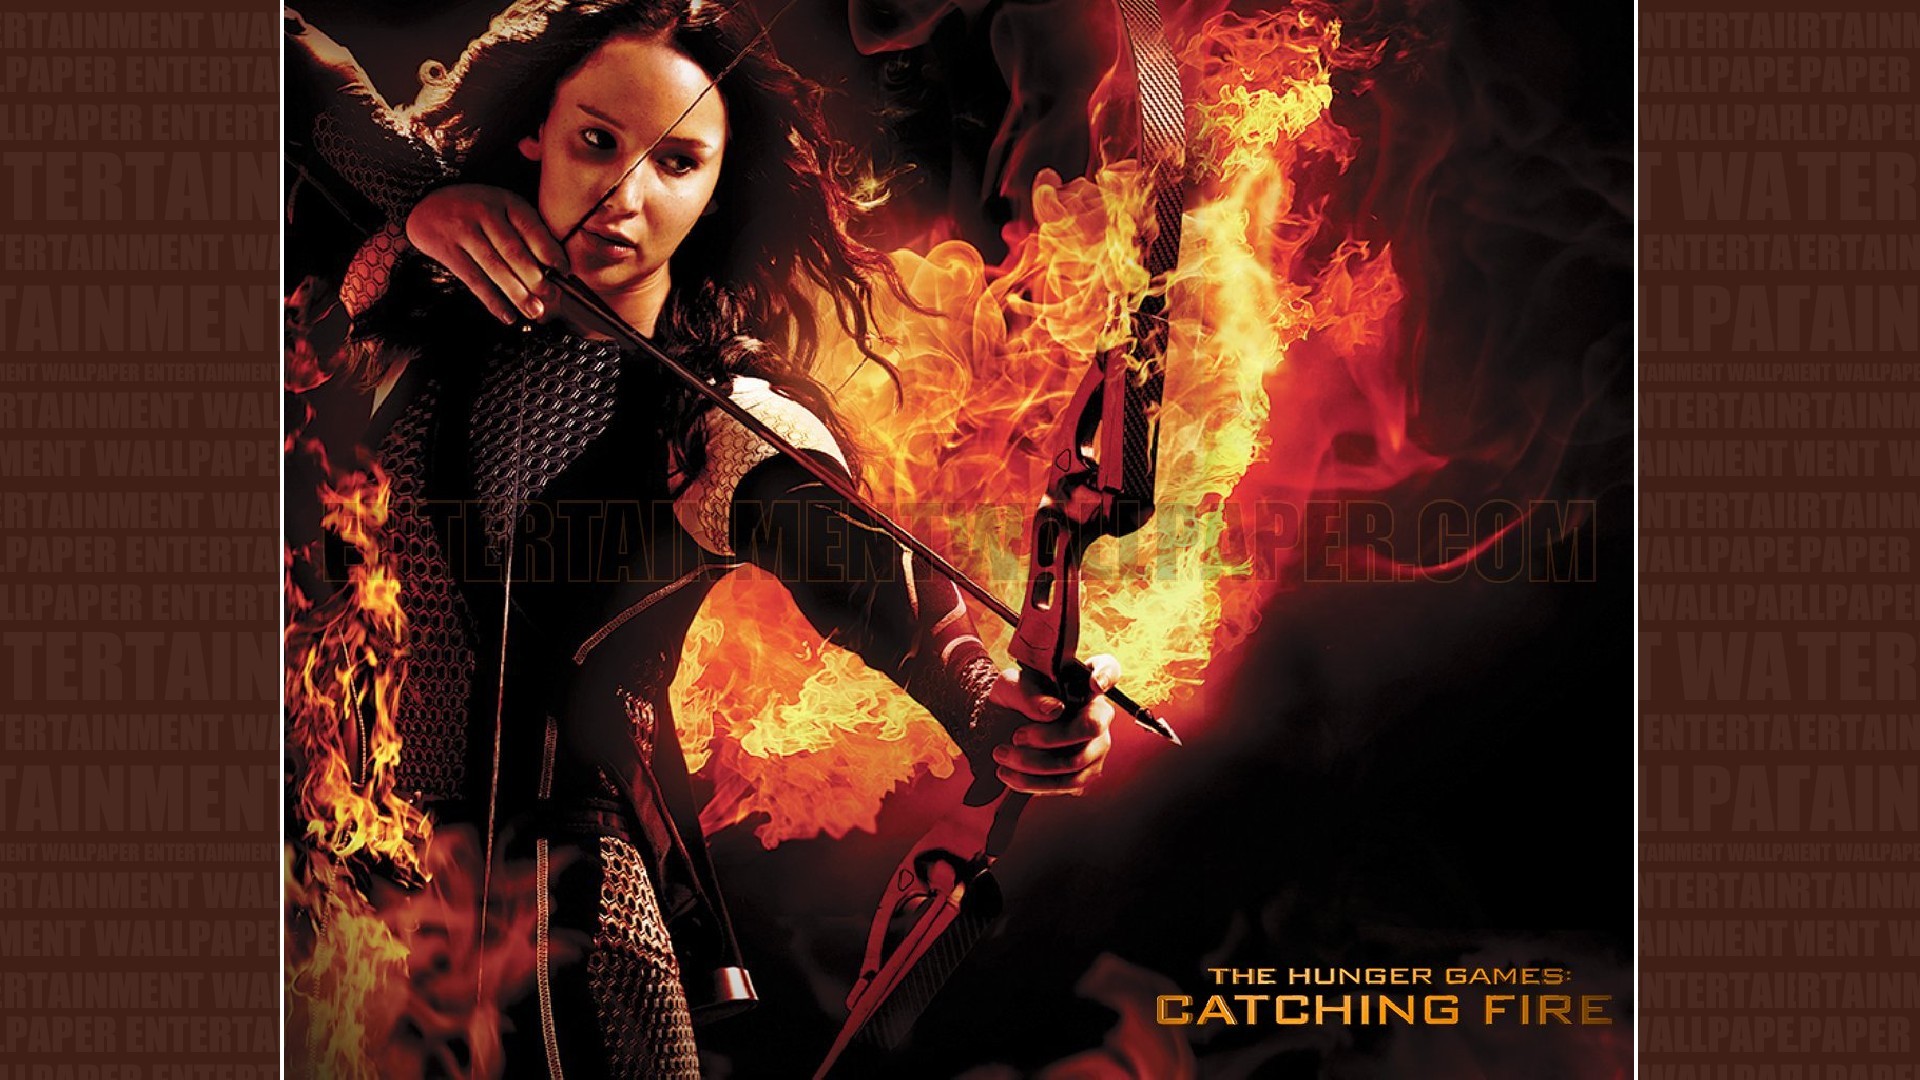 1920x1080 The Hunger Games Catching Fire Katniss